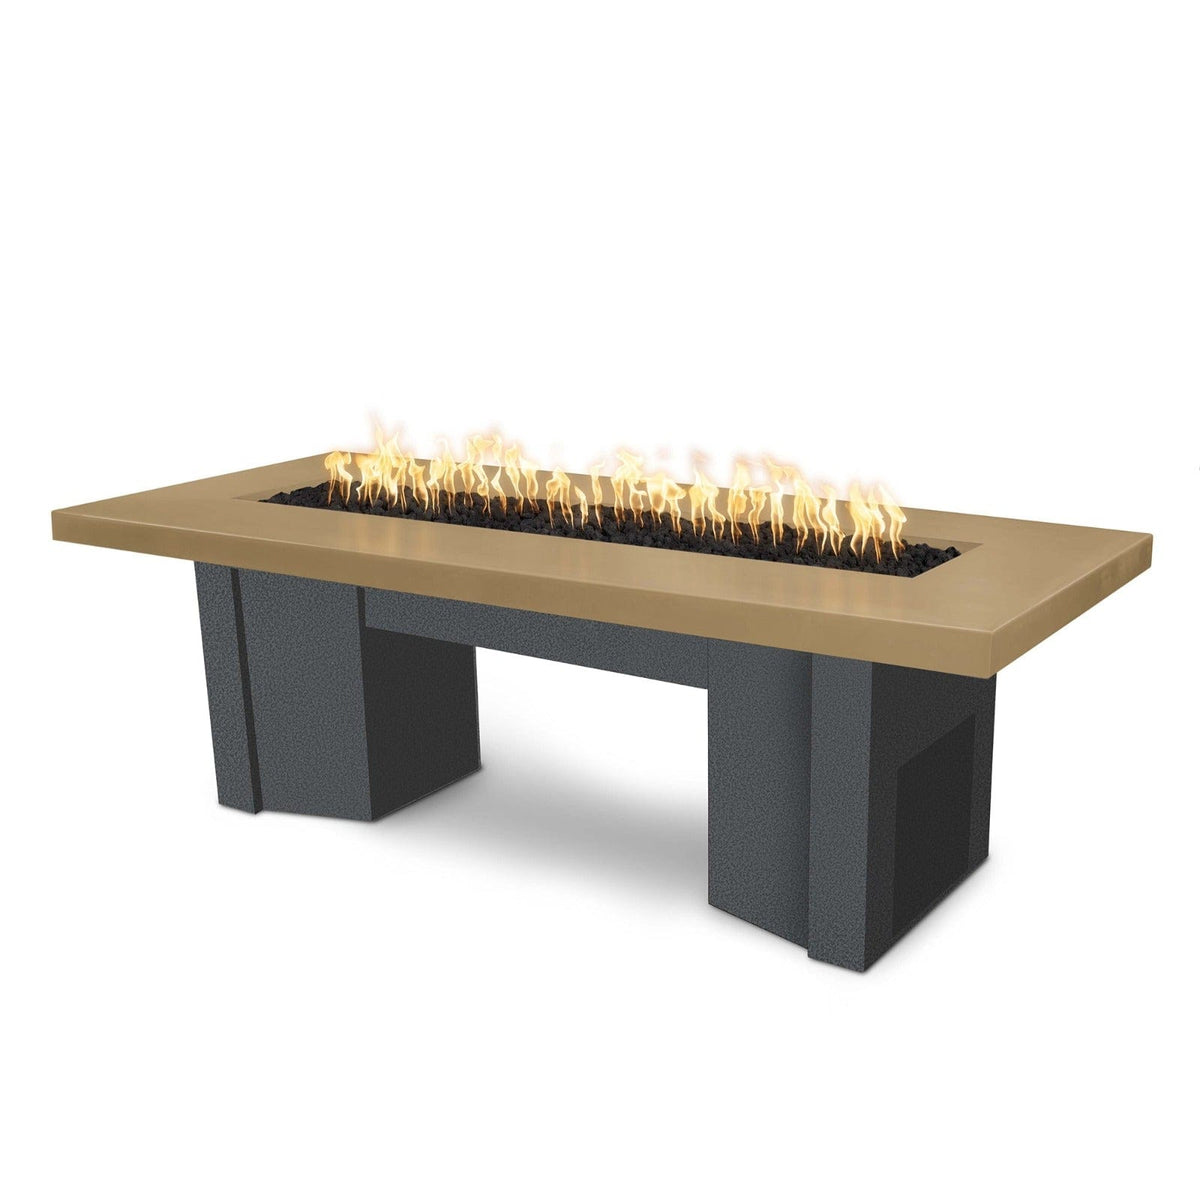 The Outdoor Plus Fire Features Brown (-BRN) / Silver Vein Powder Coated Steel (-SLV) The Outdoor Plus 60&quot; Alameda Fire Table Smooth Concrete in Liquid Propane - Flame Sense System with Push Button Spark Igniter / OPT-ALMGFRC60FSEN-LP